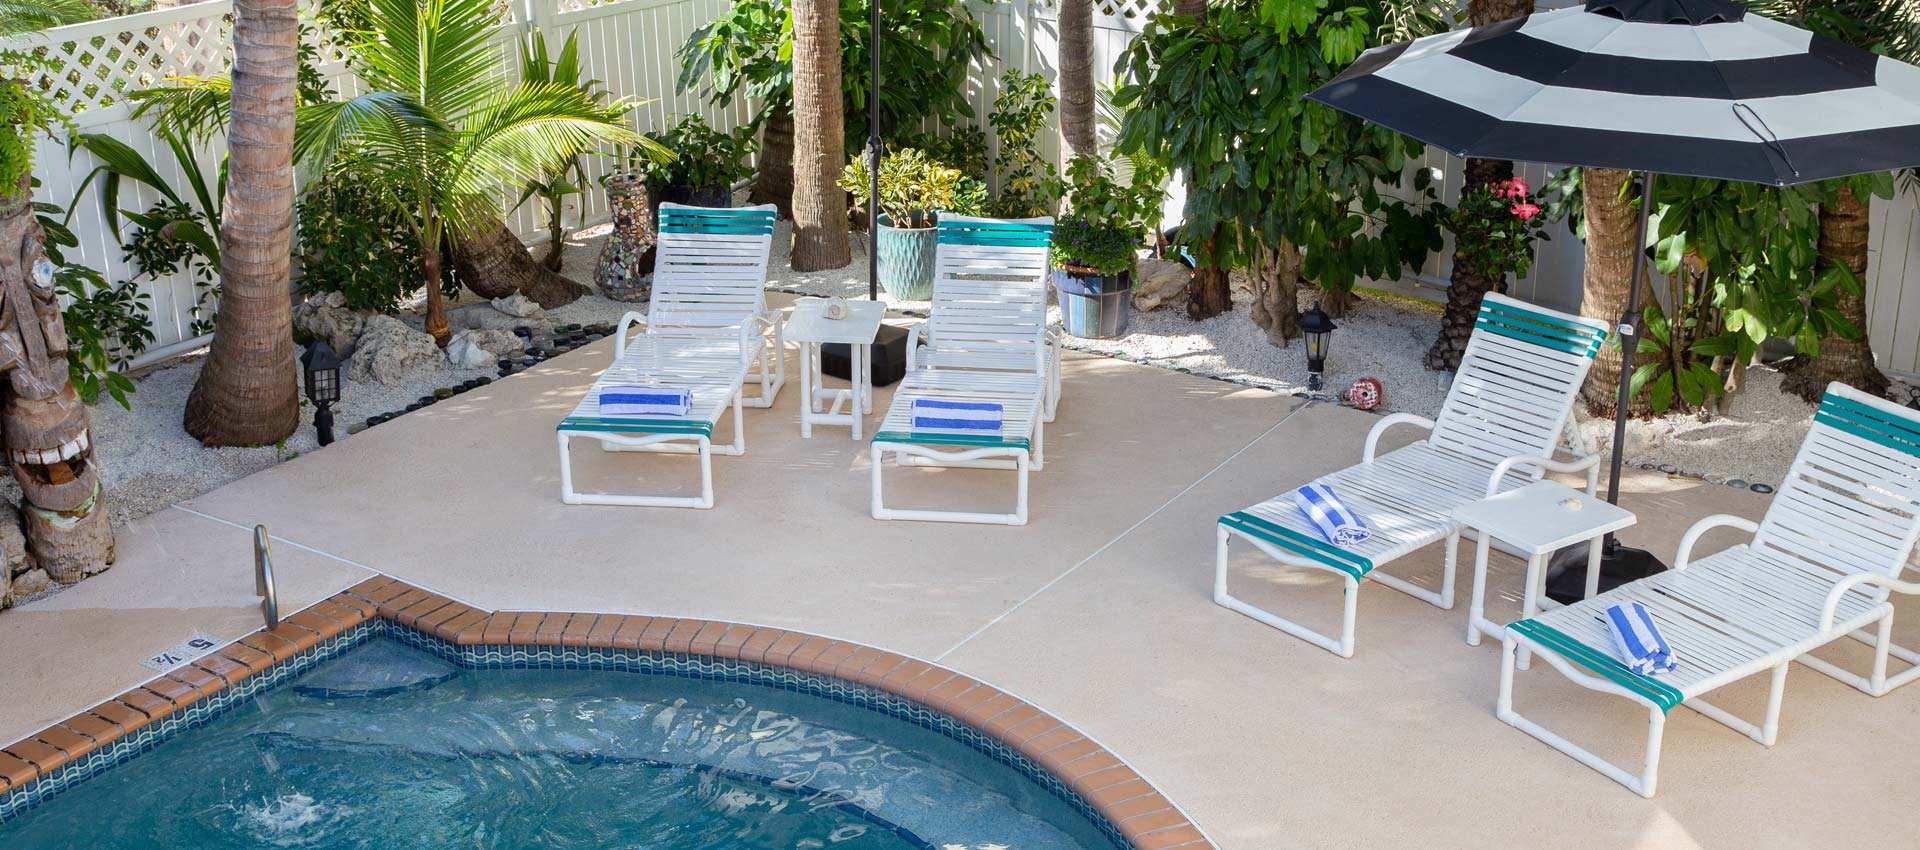 Poolside deck chairs ready for a swim